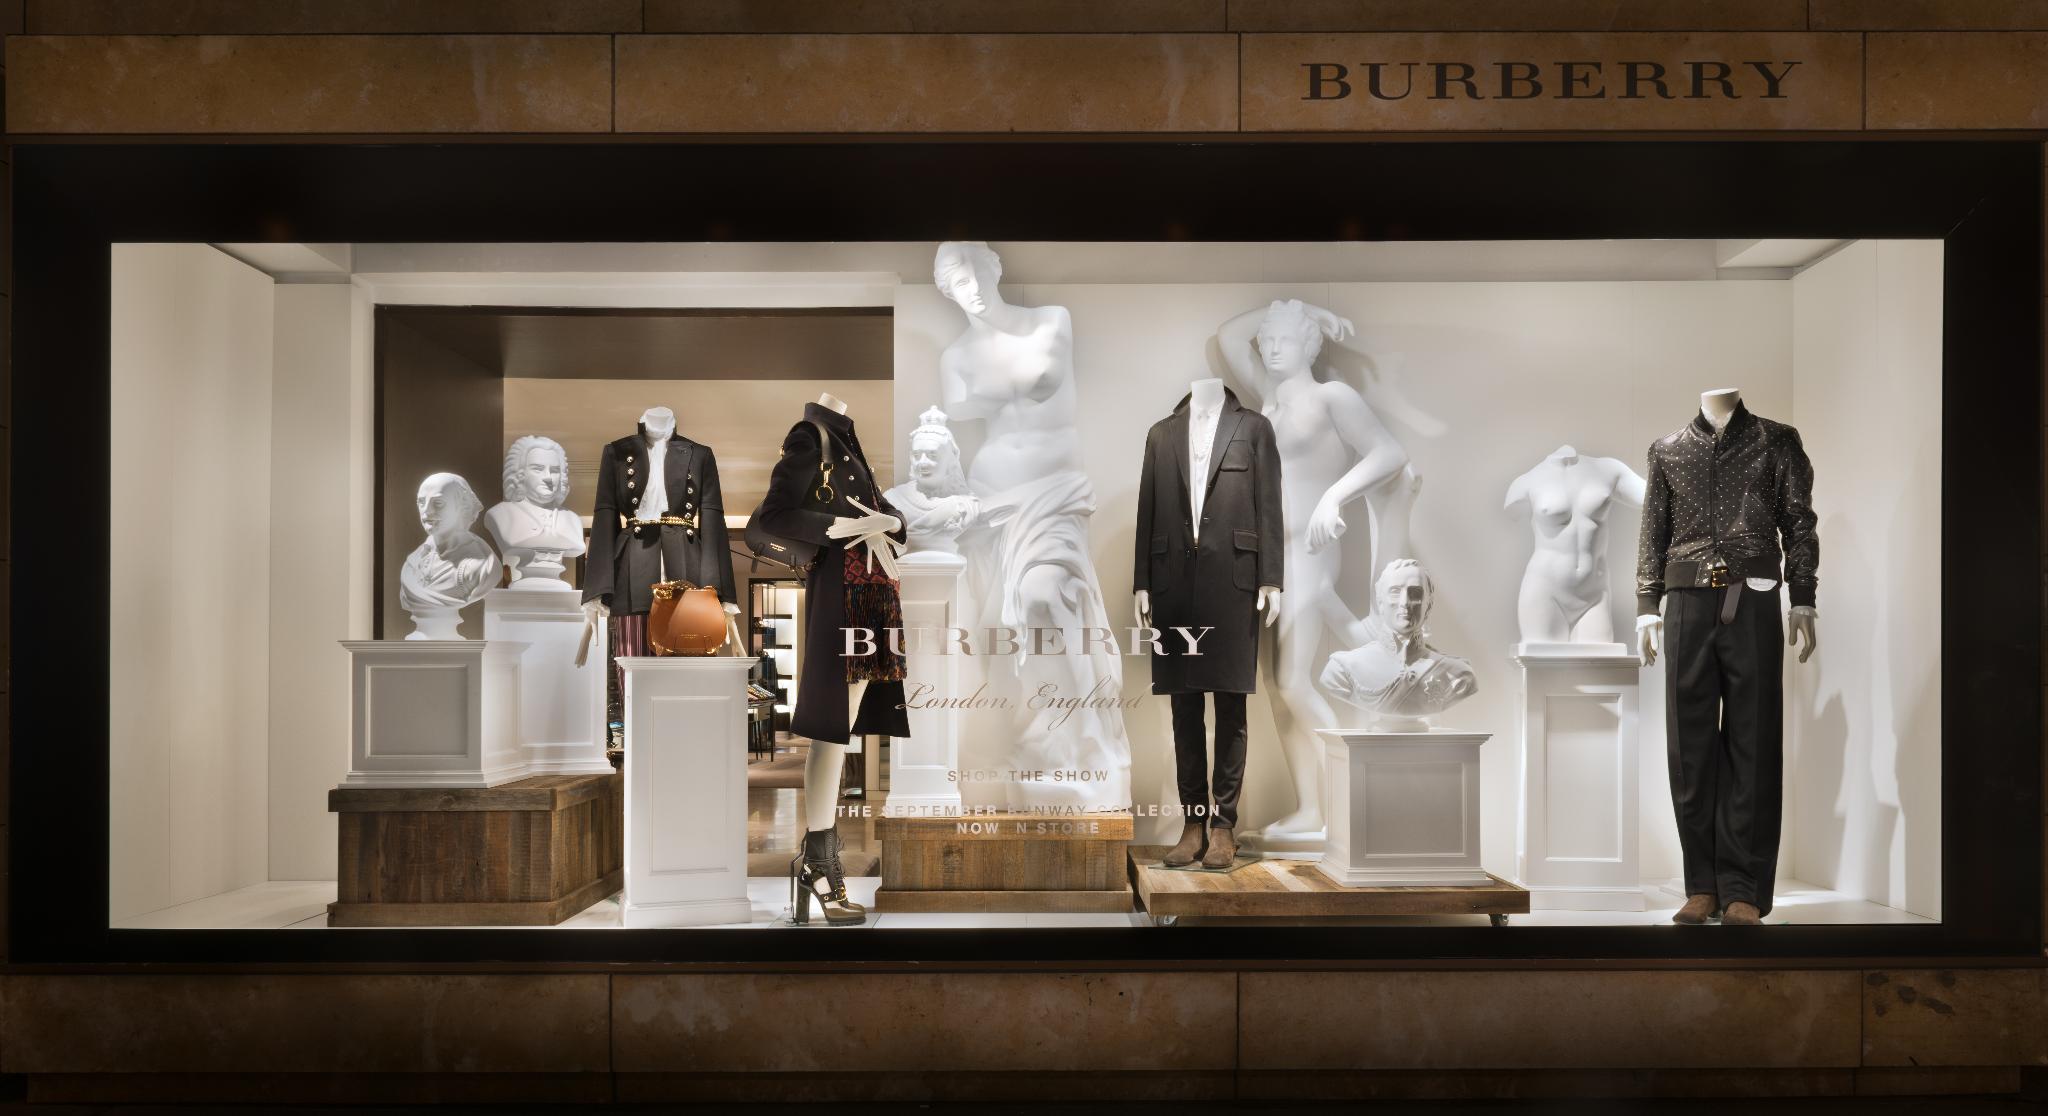 Burberry on "The new September collection in the windows of the @Burberry flagship https://t.co/oUjluEBWtO" / Twitter